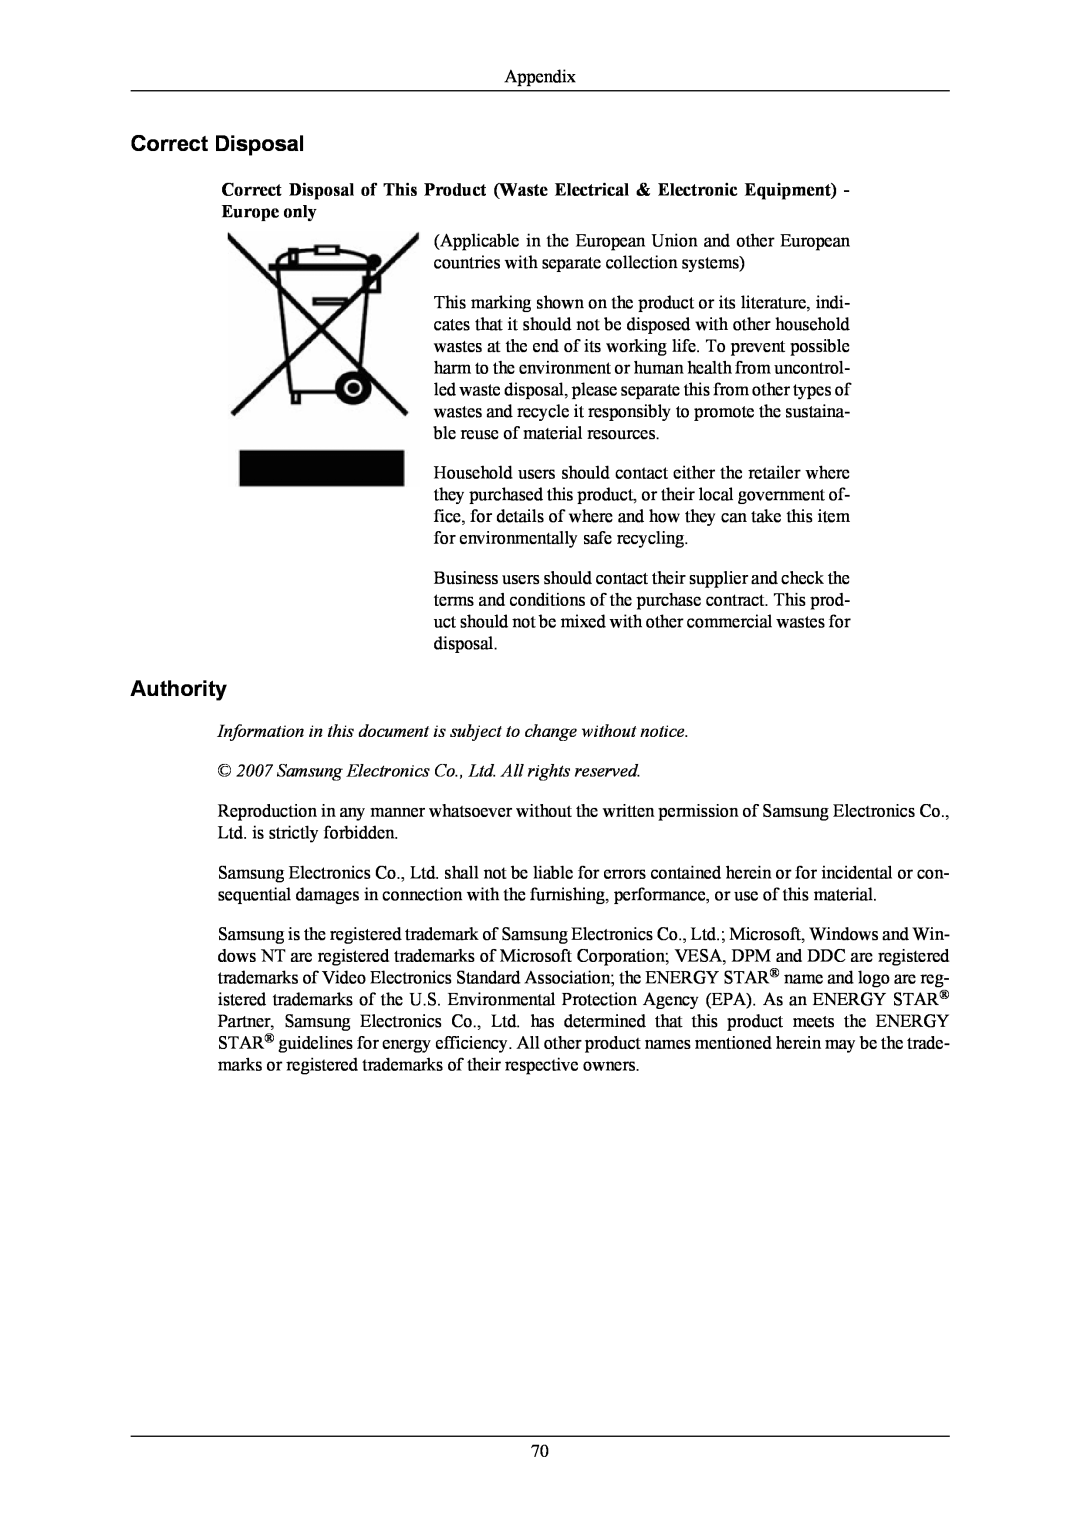 Sharp 743BM user manual Correct Disposal, Authority, Information in this document is subject to change without notice 